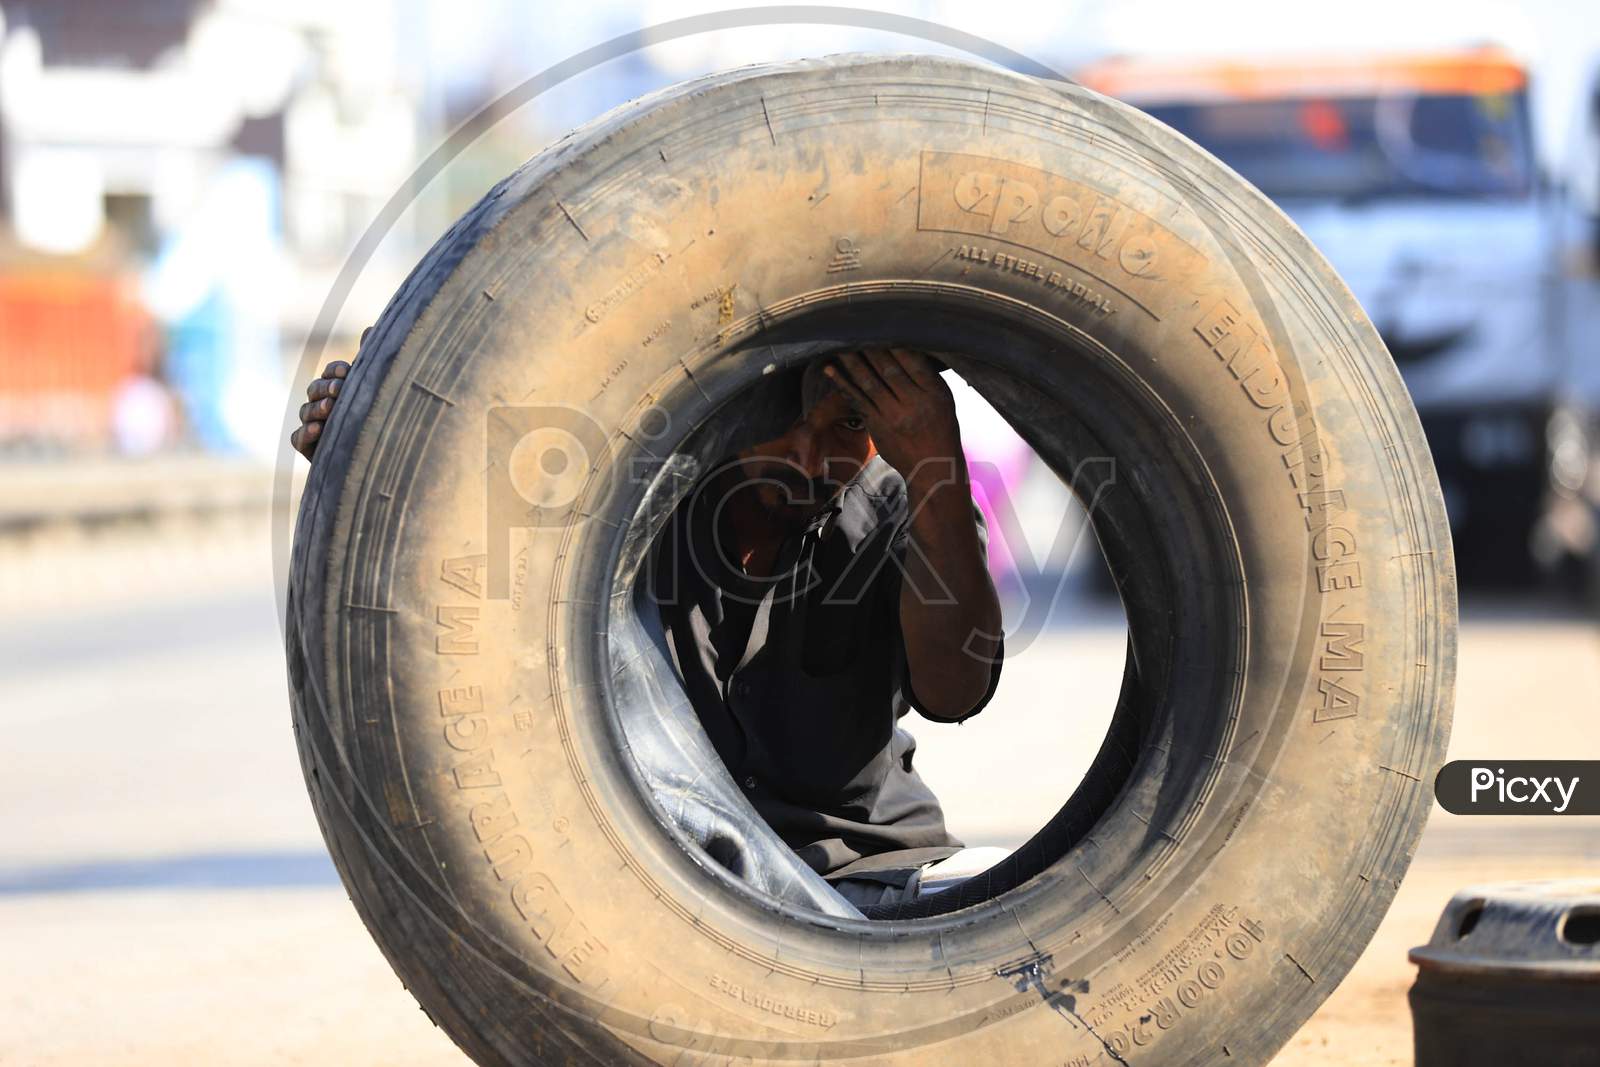 A Man Repairing Truck Tyre  at a Road Side Shop  During Extended Nationwide Lockdown Amidst Coronavirus Or COVID-19 Pandemic in Prayagraj